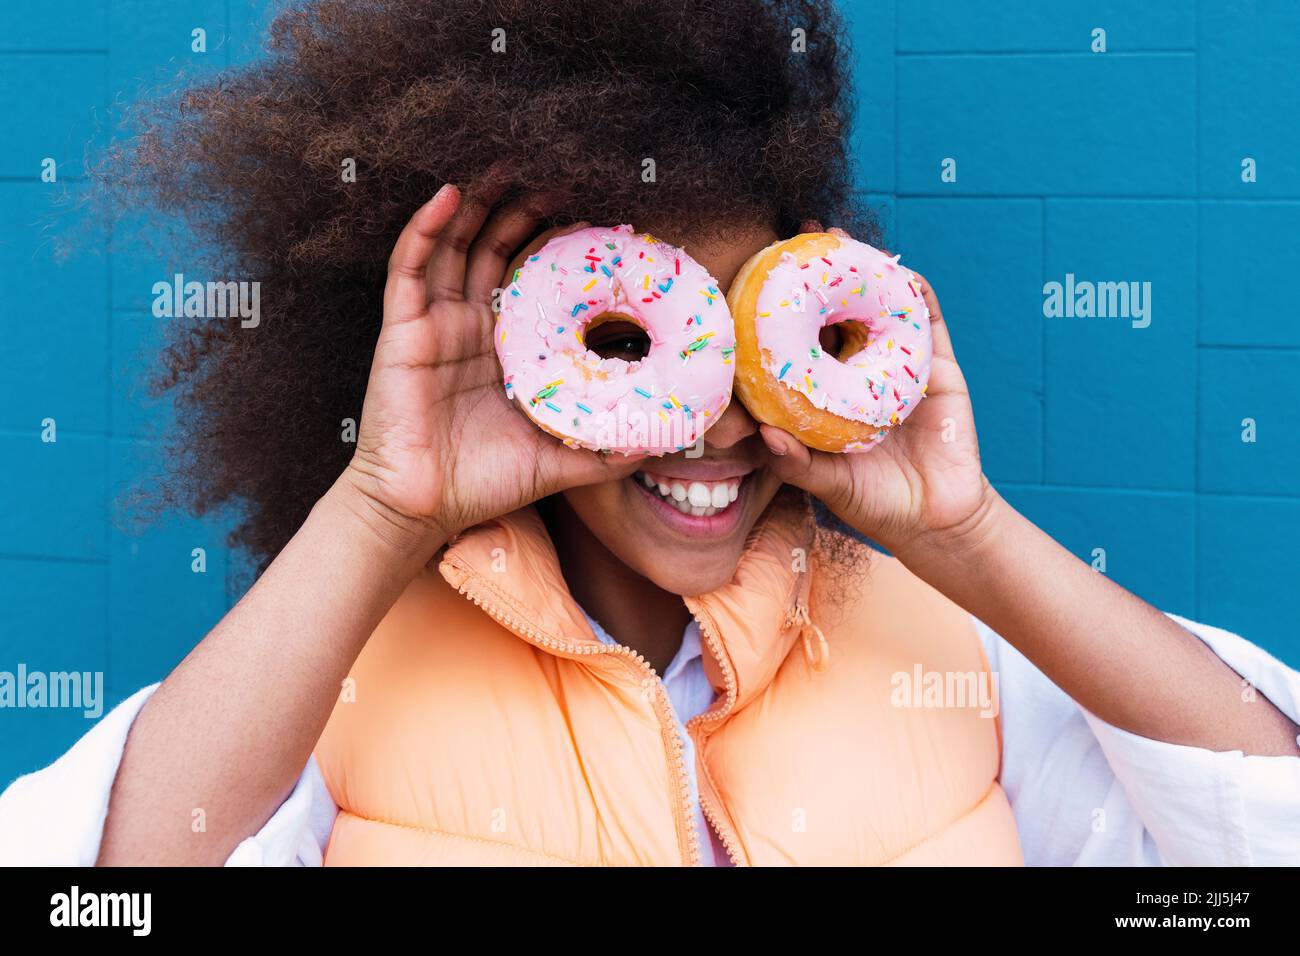 Cheerful girl covering eyes with doughnuts in front of blue wall Stock Photo